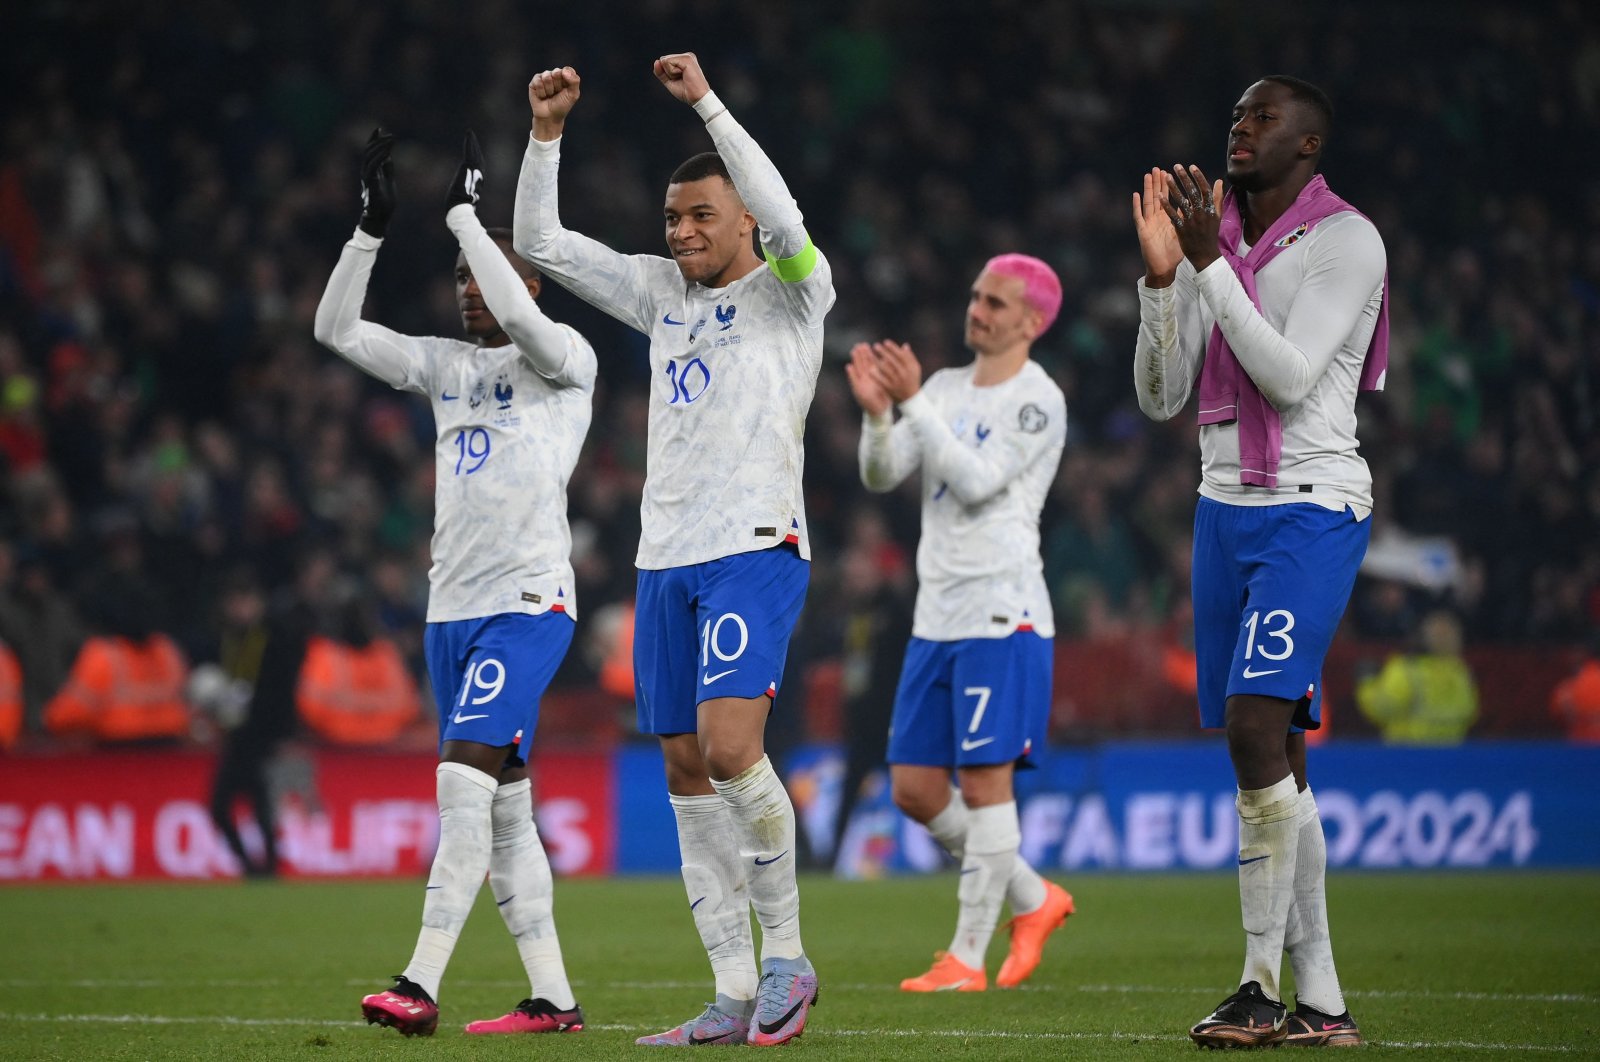 French strikers Kylian Mbappe (2nd L), Moussa Diaby (L) and Antoine Griezmann (2nd R), and defender Ibrahima Konate (R) applaud fans on the final whistle in the UEFA Euro 2024 group B qualification football match between Ireland and France at Aviva Stadium in Dublin, Ireland on March 27, 2023. (AFP Photo)